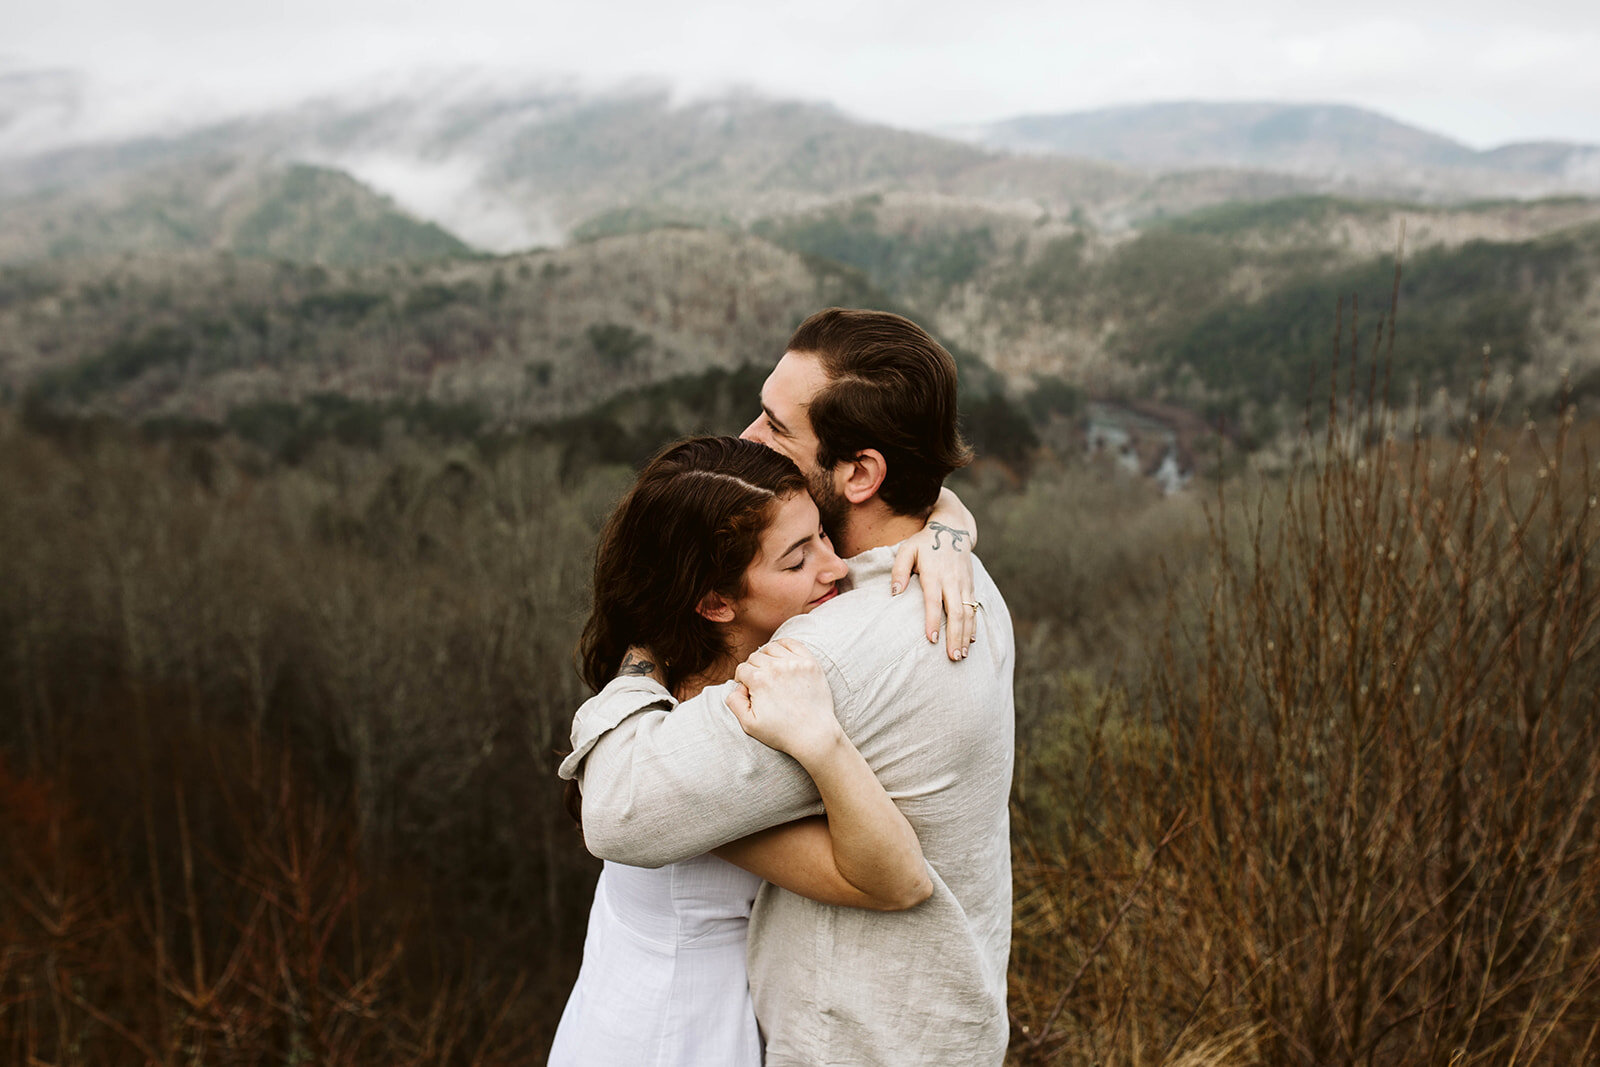 adventure-engagement-in-the-great-smoky-mountains-chattanooga-elopement-photographer5Y6A5089_websize.jpg